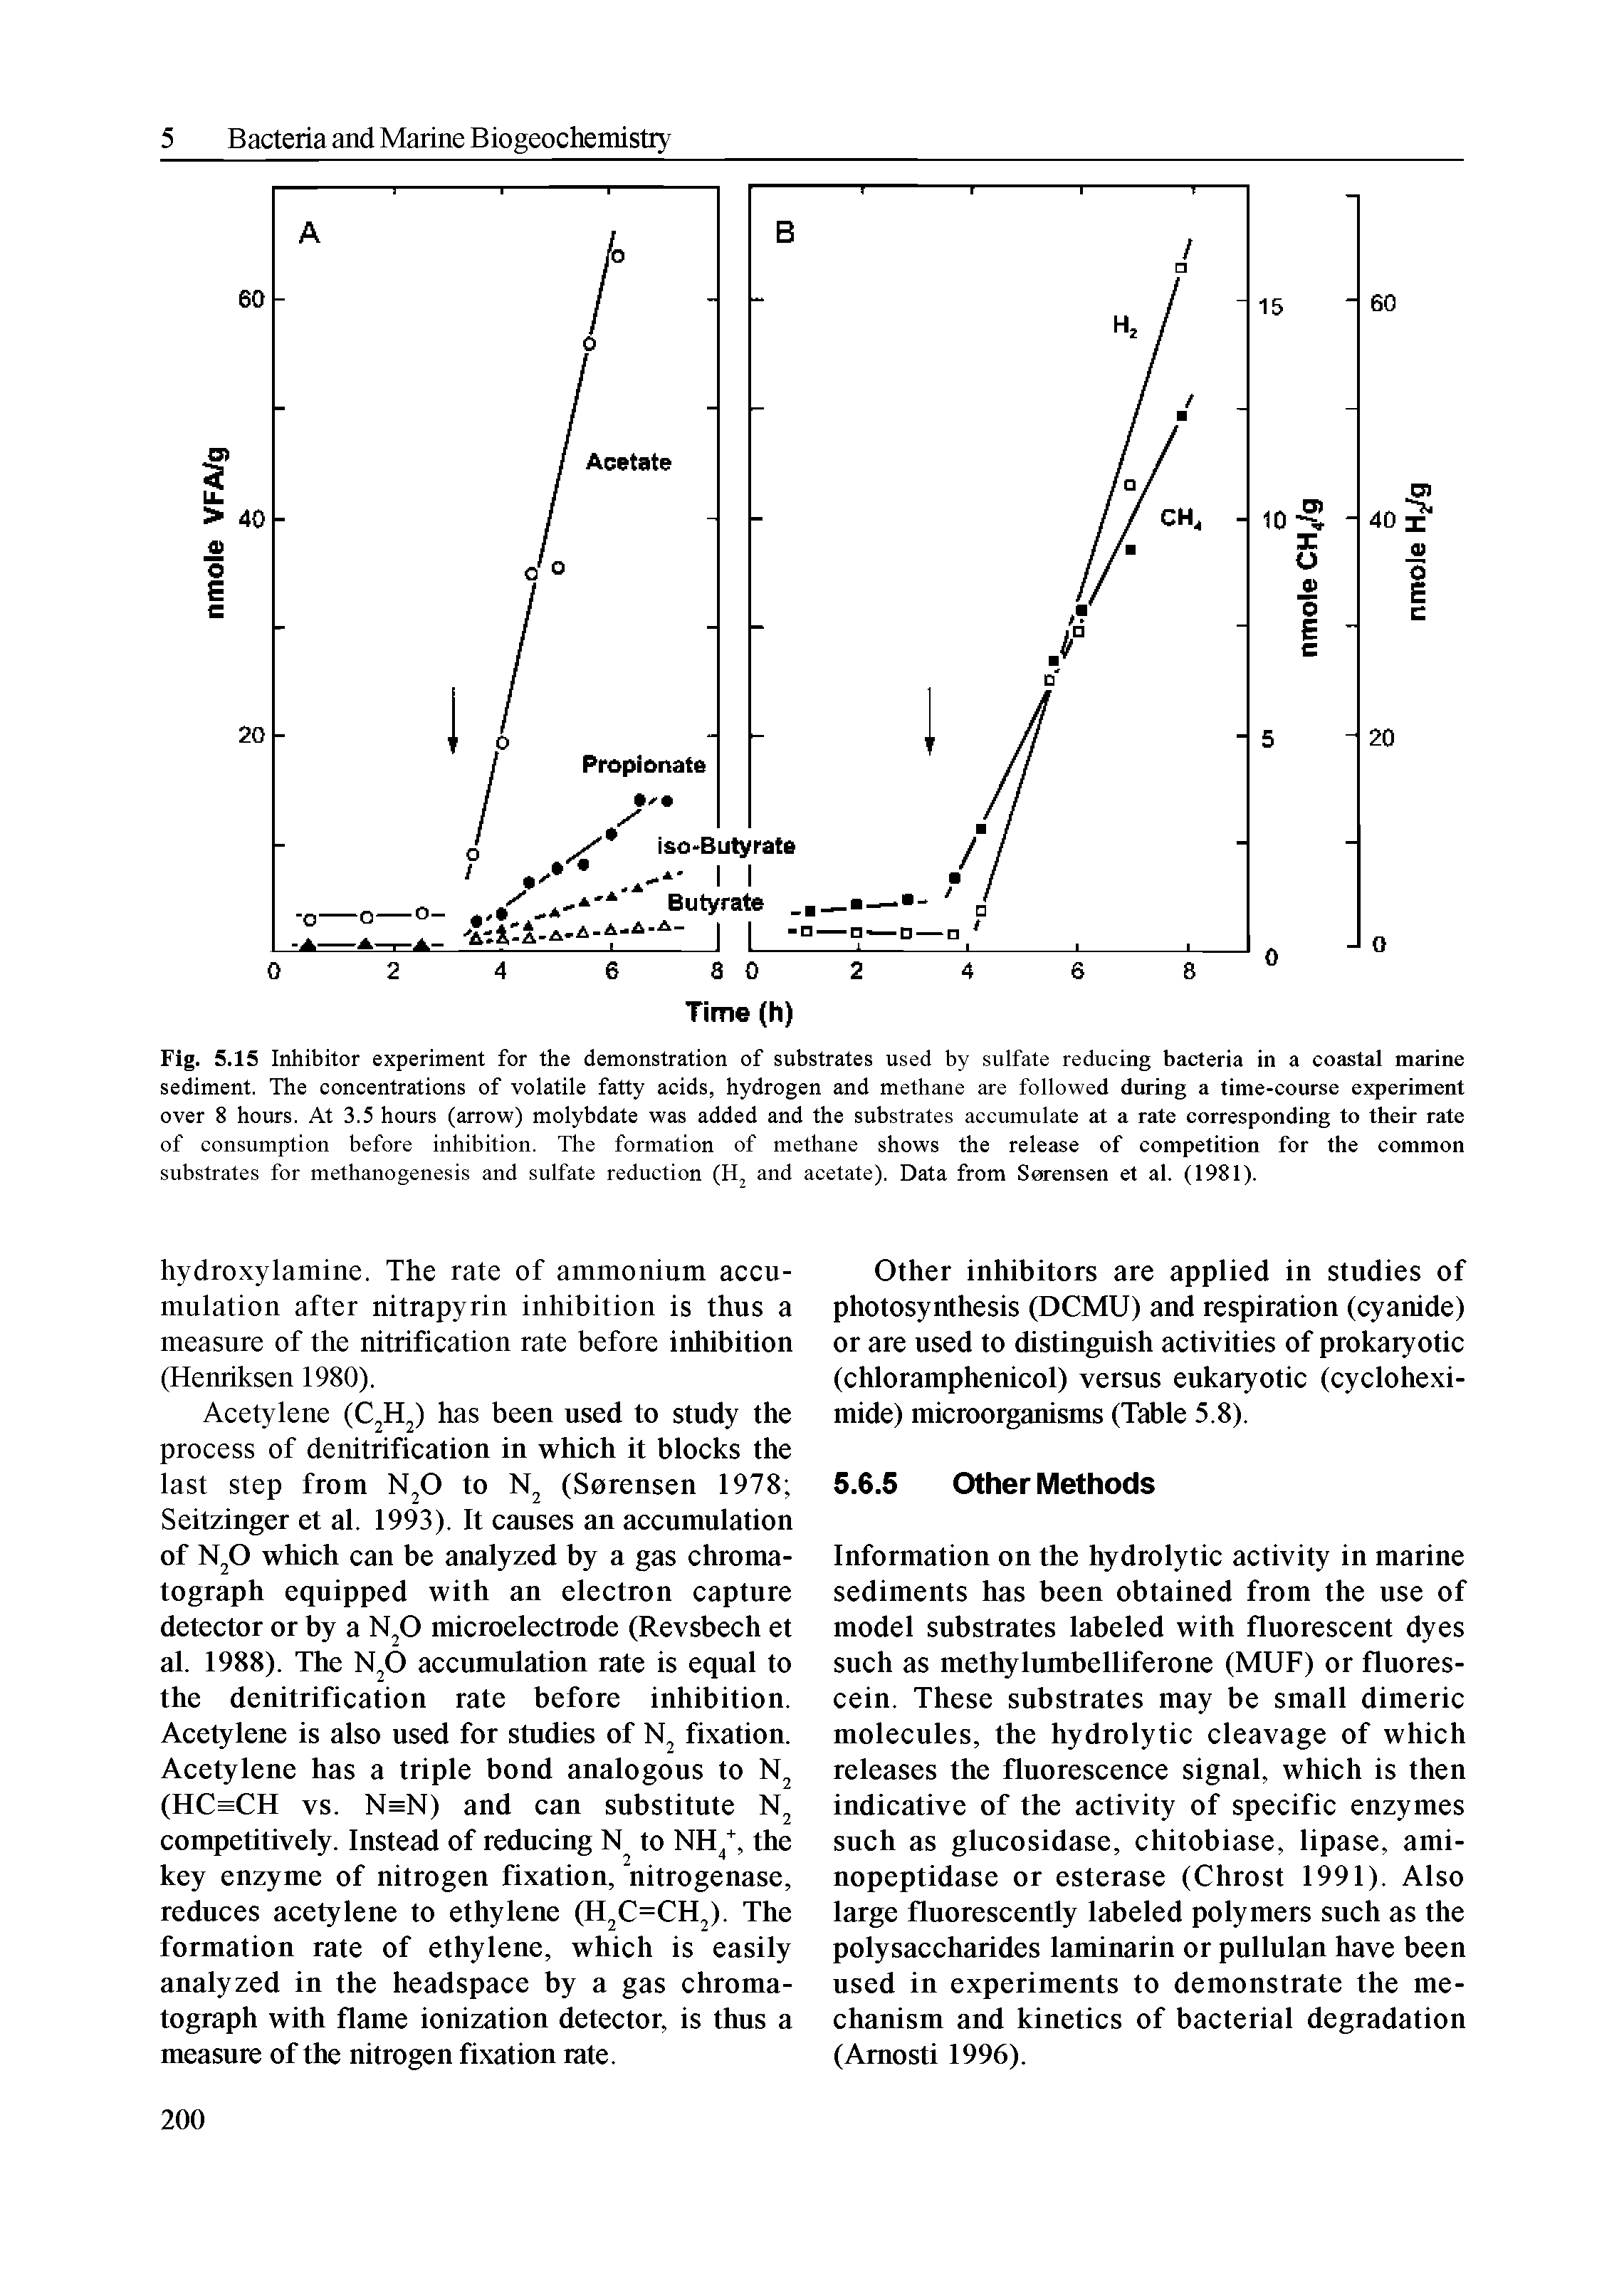 Fig. 5.15 Inhibitor experiment for the demonstration of substrates used by sulfate reducing bacteria in a coastal marine sediment. The concentrations of volatile fatty acids, hydrogen and methane are followed during a time-course experiment over 8 hours. At 3.5 hours (arrow) molybdate was added and the substrates accumulate at a rate corresponding to their rate of consumption before inhibition. The formation of methane shows the release of competition for the common substrates for methanogenesis and sulfate reduction (H and acetate). Data from Sorensen et al. (1981).